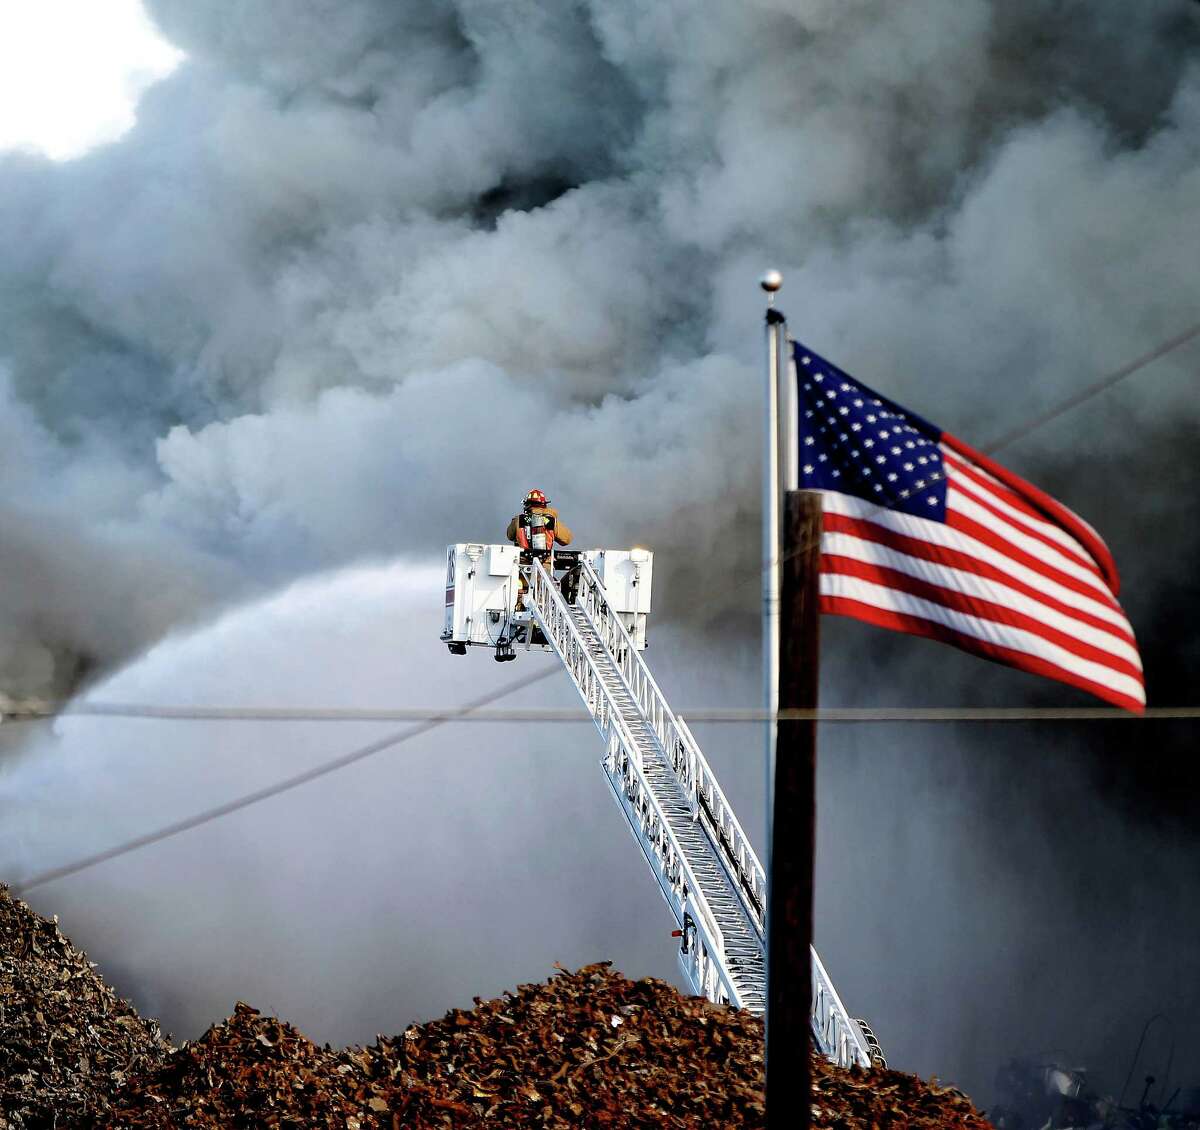 Houston Firefighters work to contain a large fire at the intersection of Harrisburg and Navigation near the Houston Ship Channel, Saturday, Nov. 1, 2014, in Houston. It appeared to be scrapped cars on fire.